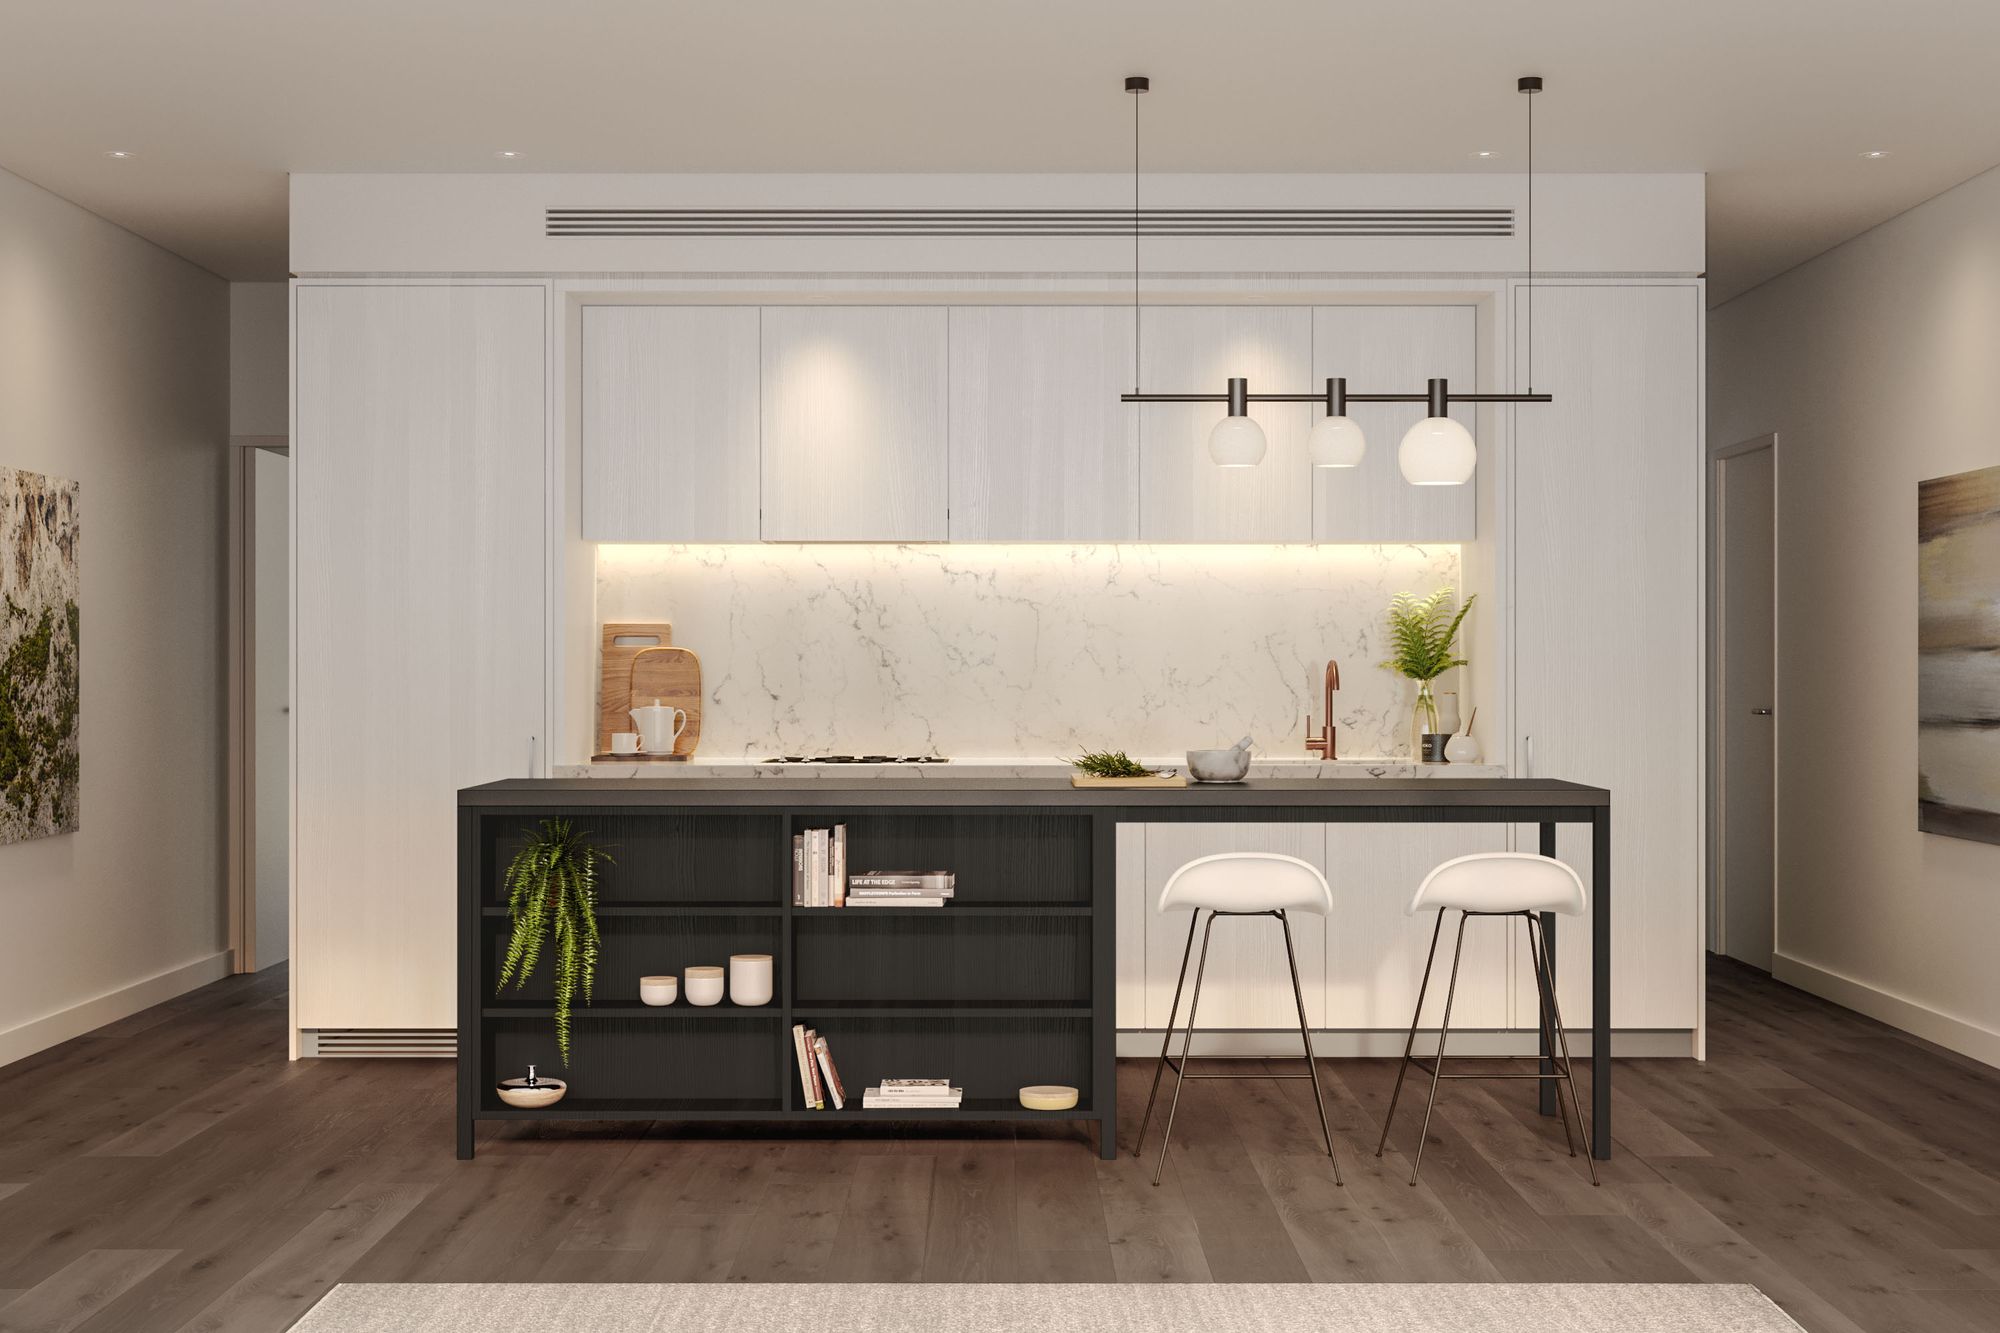 The image depicts a modern and minimalist kitchen interior. The design primarily uses neutral tones with a mix of light wooden cabinetry and a dark kitchen island. The marble backsplash adds a touch of luxury, contrasting with the sleek lines of the cabinetry. The kitchen island features an open shelving unit on one side, which houses books, decorative ceramics, and a potted fern. Above the island hangs a contemporary light fixture with three white, round shades. Two elegant white barstools sit in front of the island, inviting casual dining or conversation. On the left, a textured artwork adds depth and character to the space. Soft, ambient lighting and clean lines create a calm and sophisticated atmosphere.